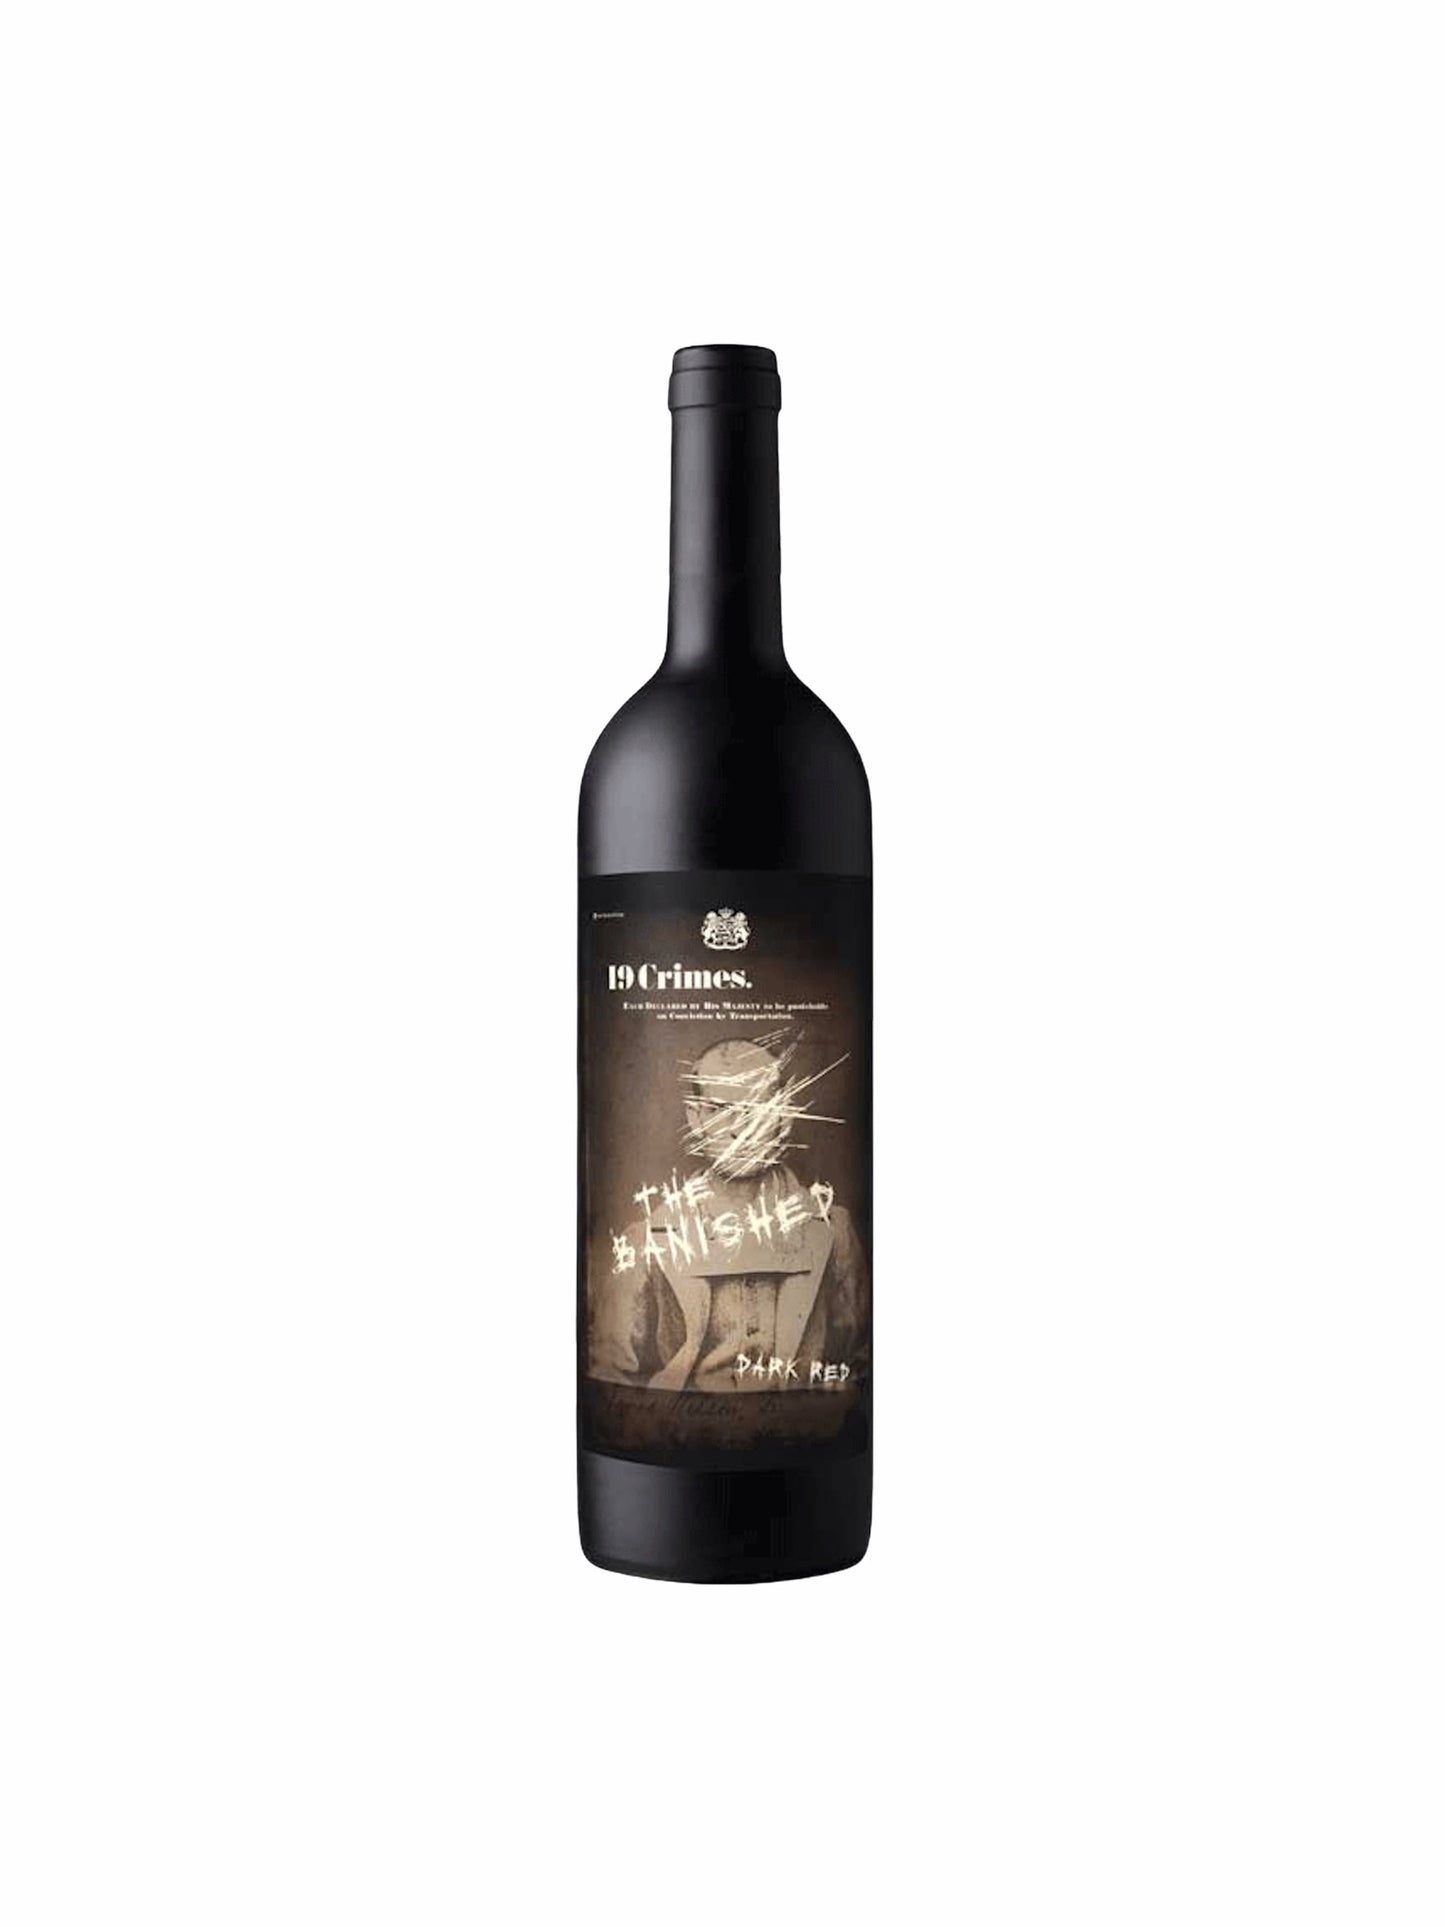 19 CRIMES THE BANISHED DARK RED 750 ML